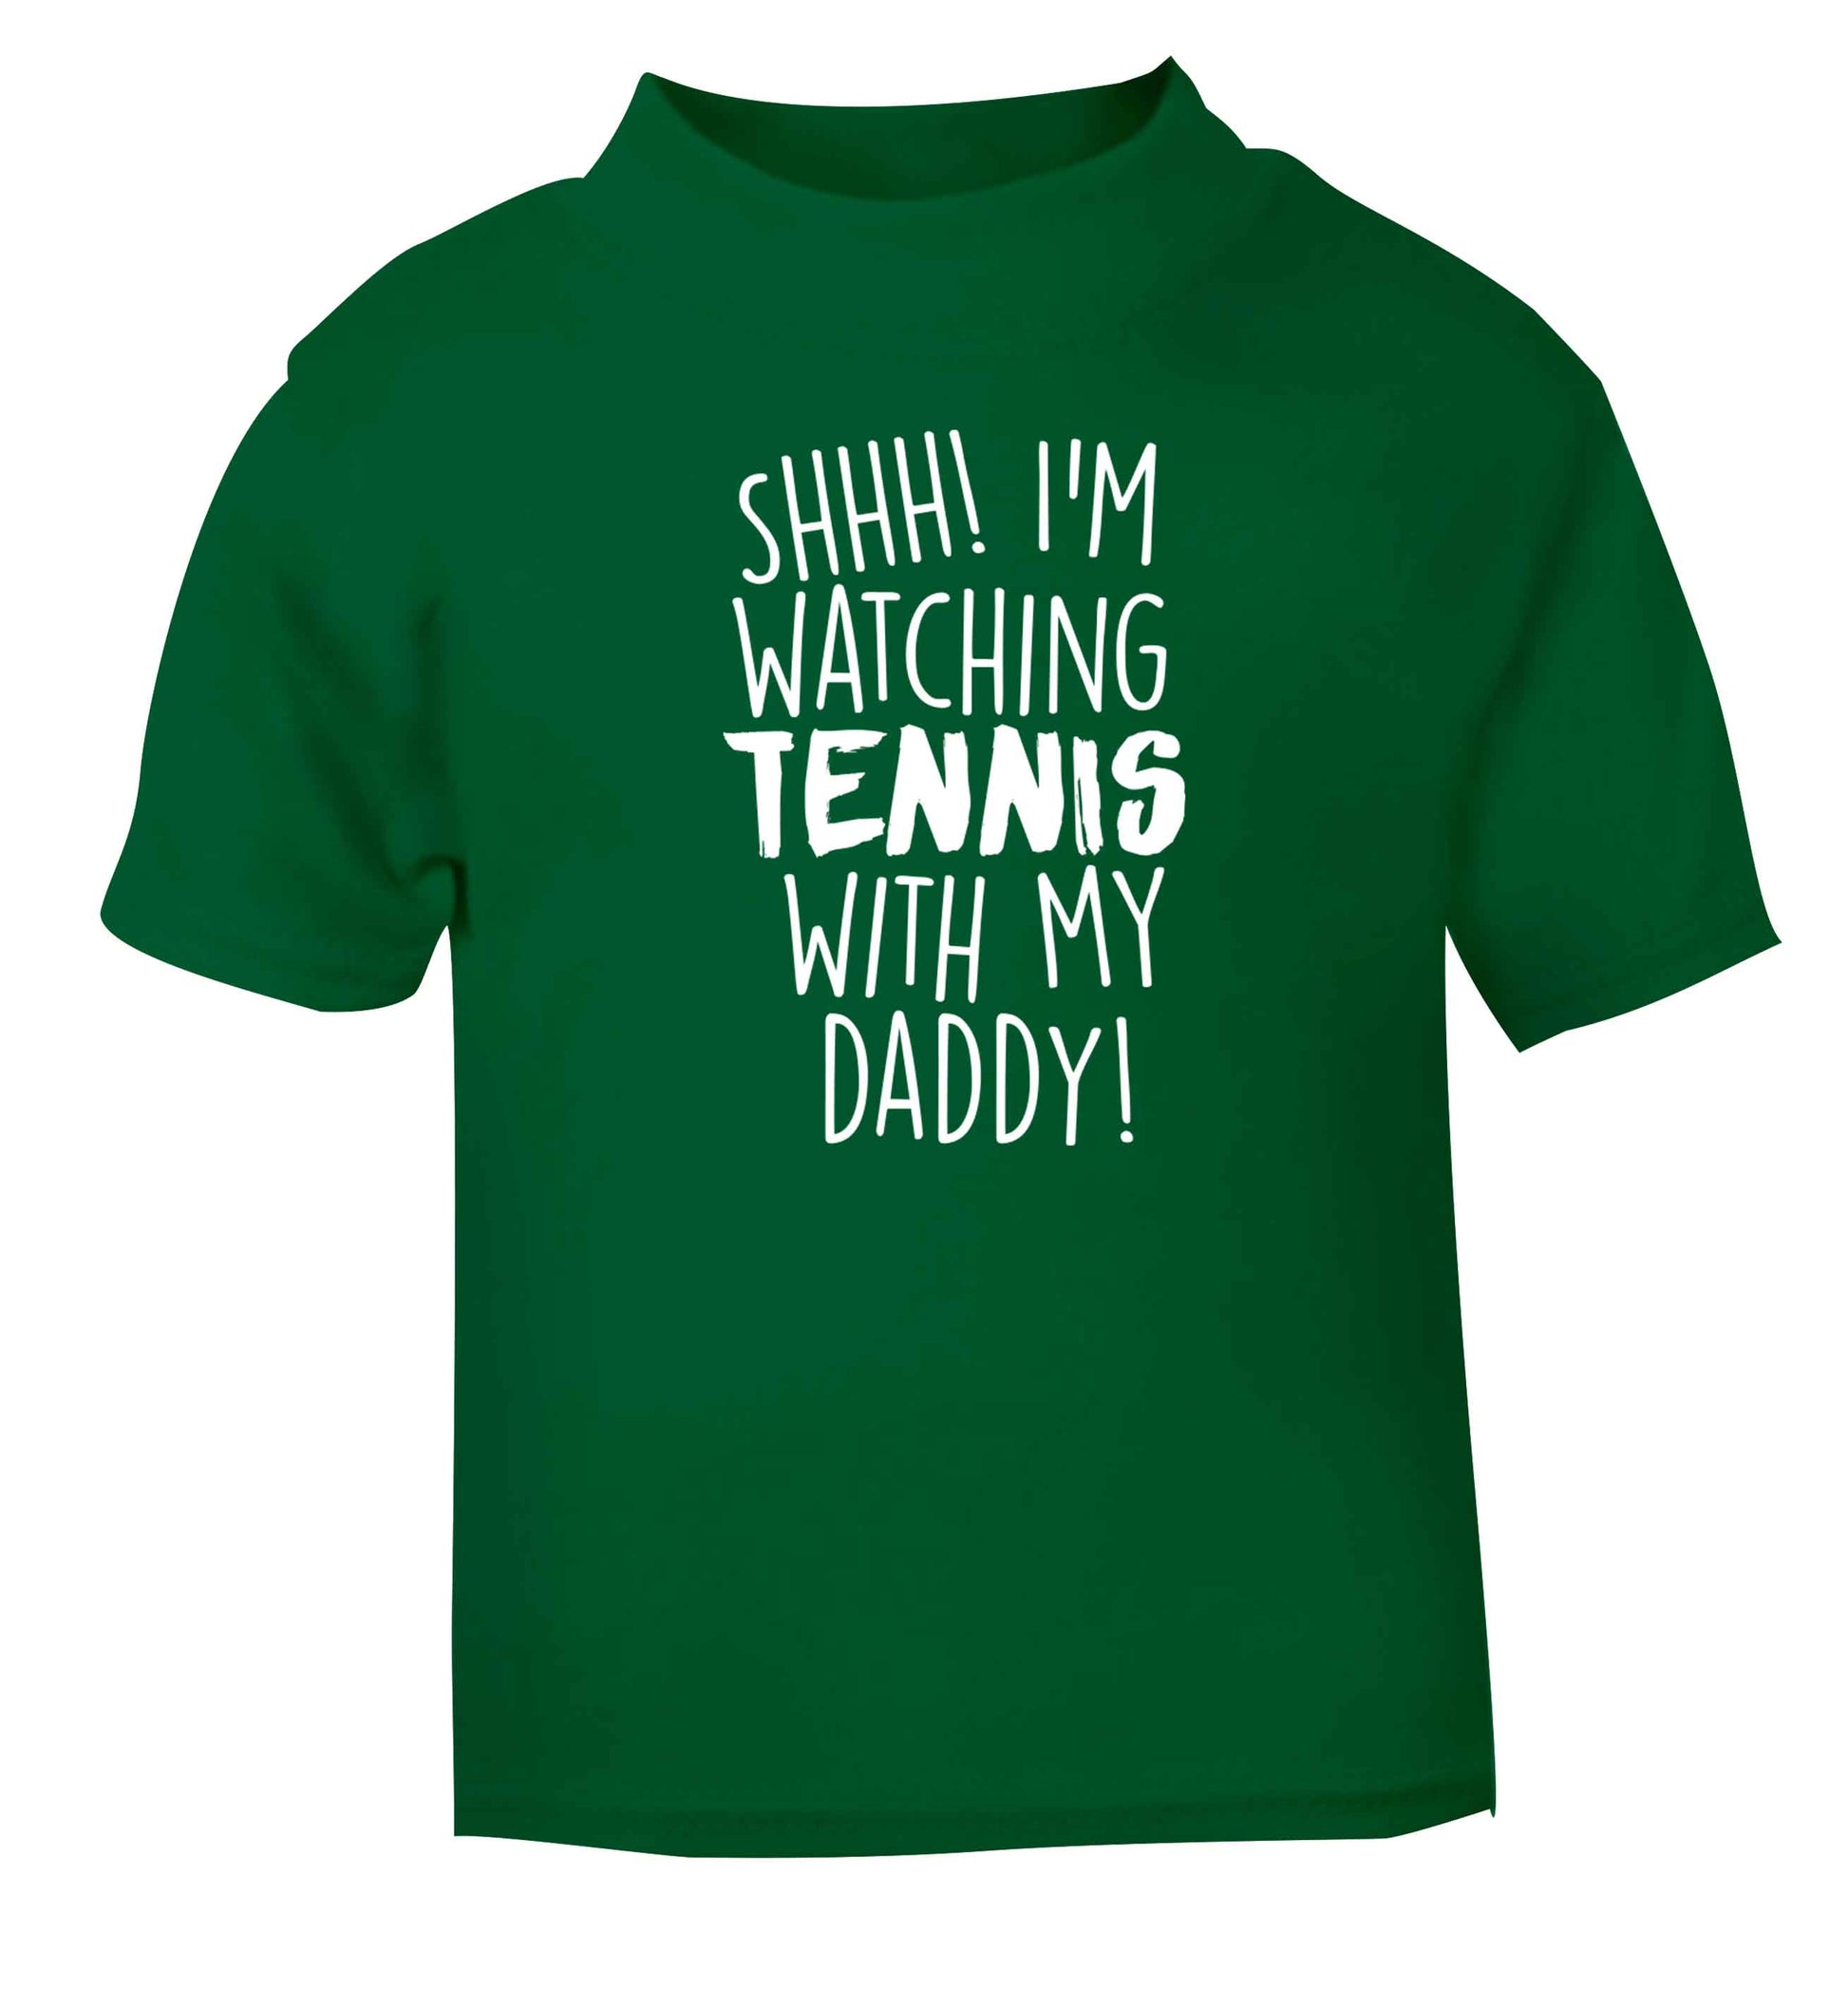 Shh! I'm watching tennis with my daddy! green Baby Toddler Tshirt 2 Years